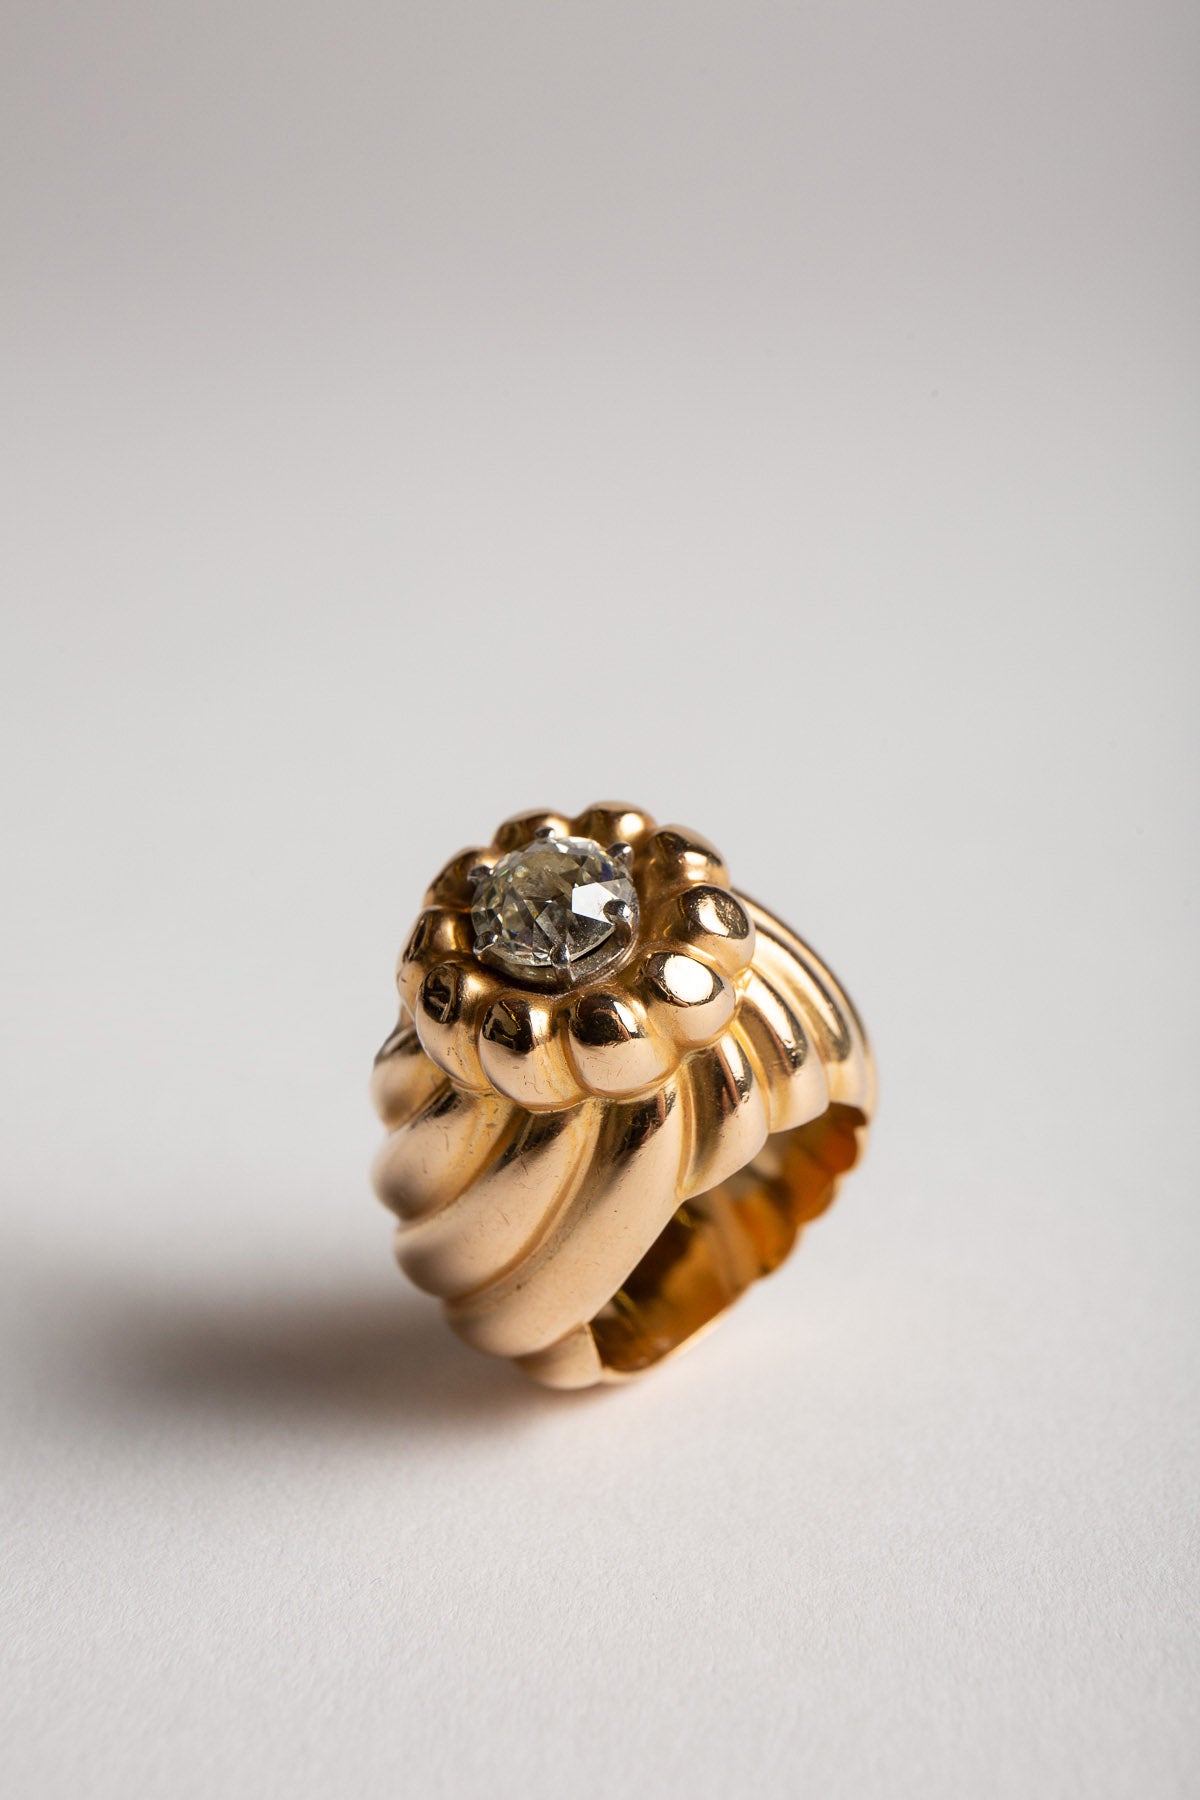 MAXFIELD PRIVATE COLLECTION | 1950'S FRENCH DIAMOND DOME RING